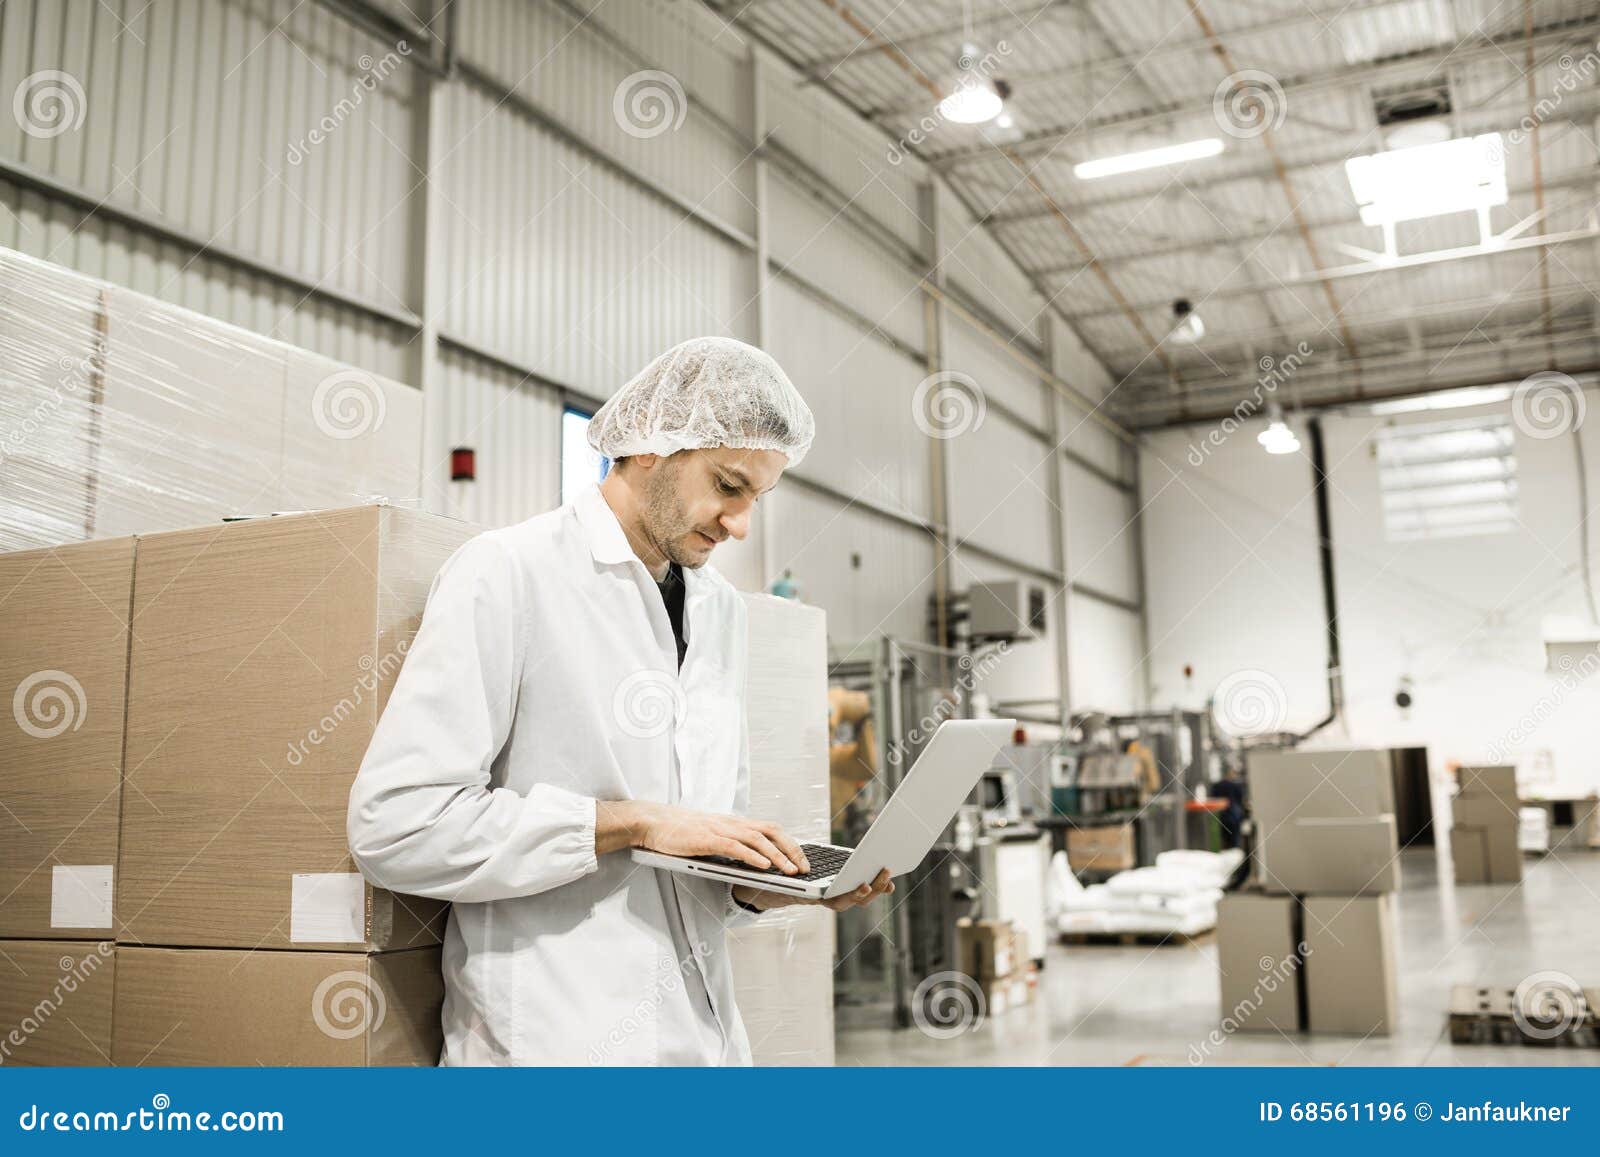 worker in warehouse for food packaging.